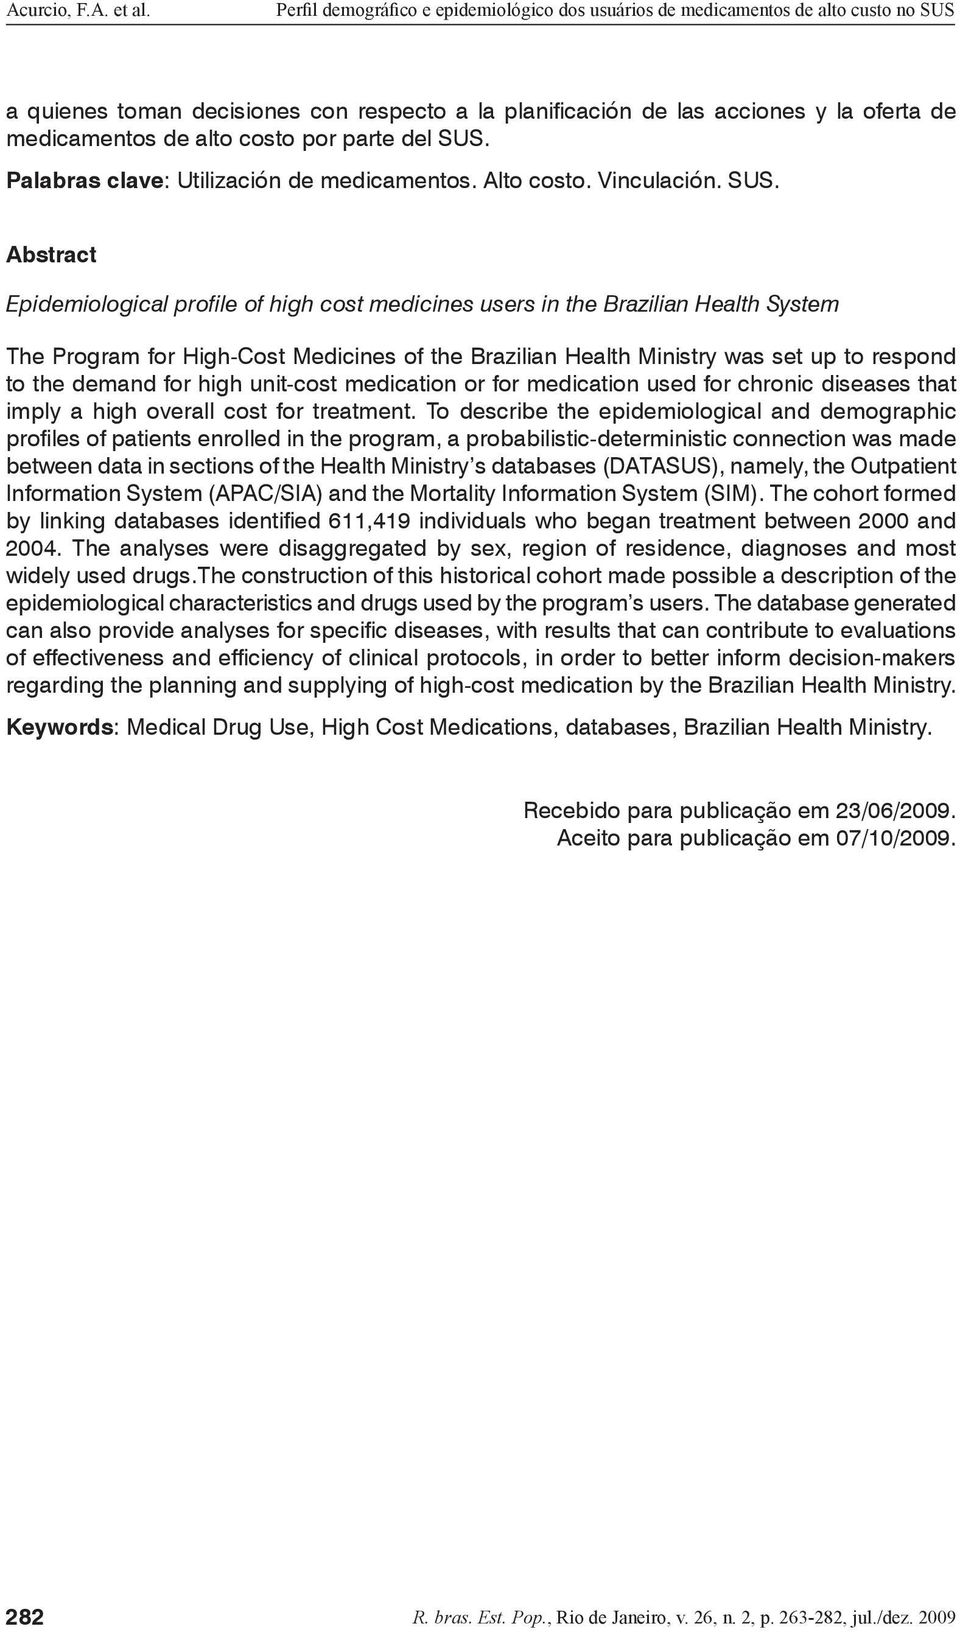 Abstract Epidemiological profile of high cost medicines users in the Brazilian Health System The Program for High-Cost Medicines of the Brazilian Health Ministry was set up to respond to the demand